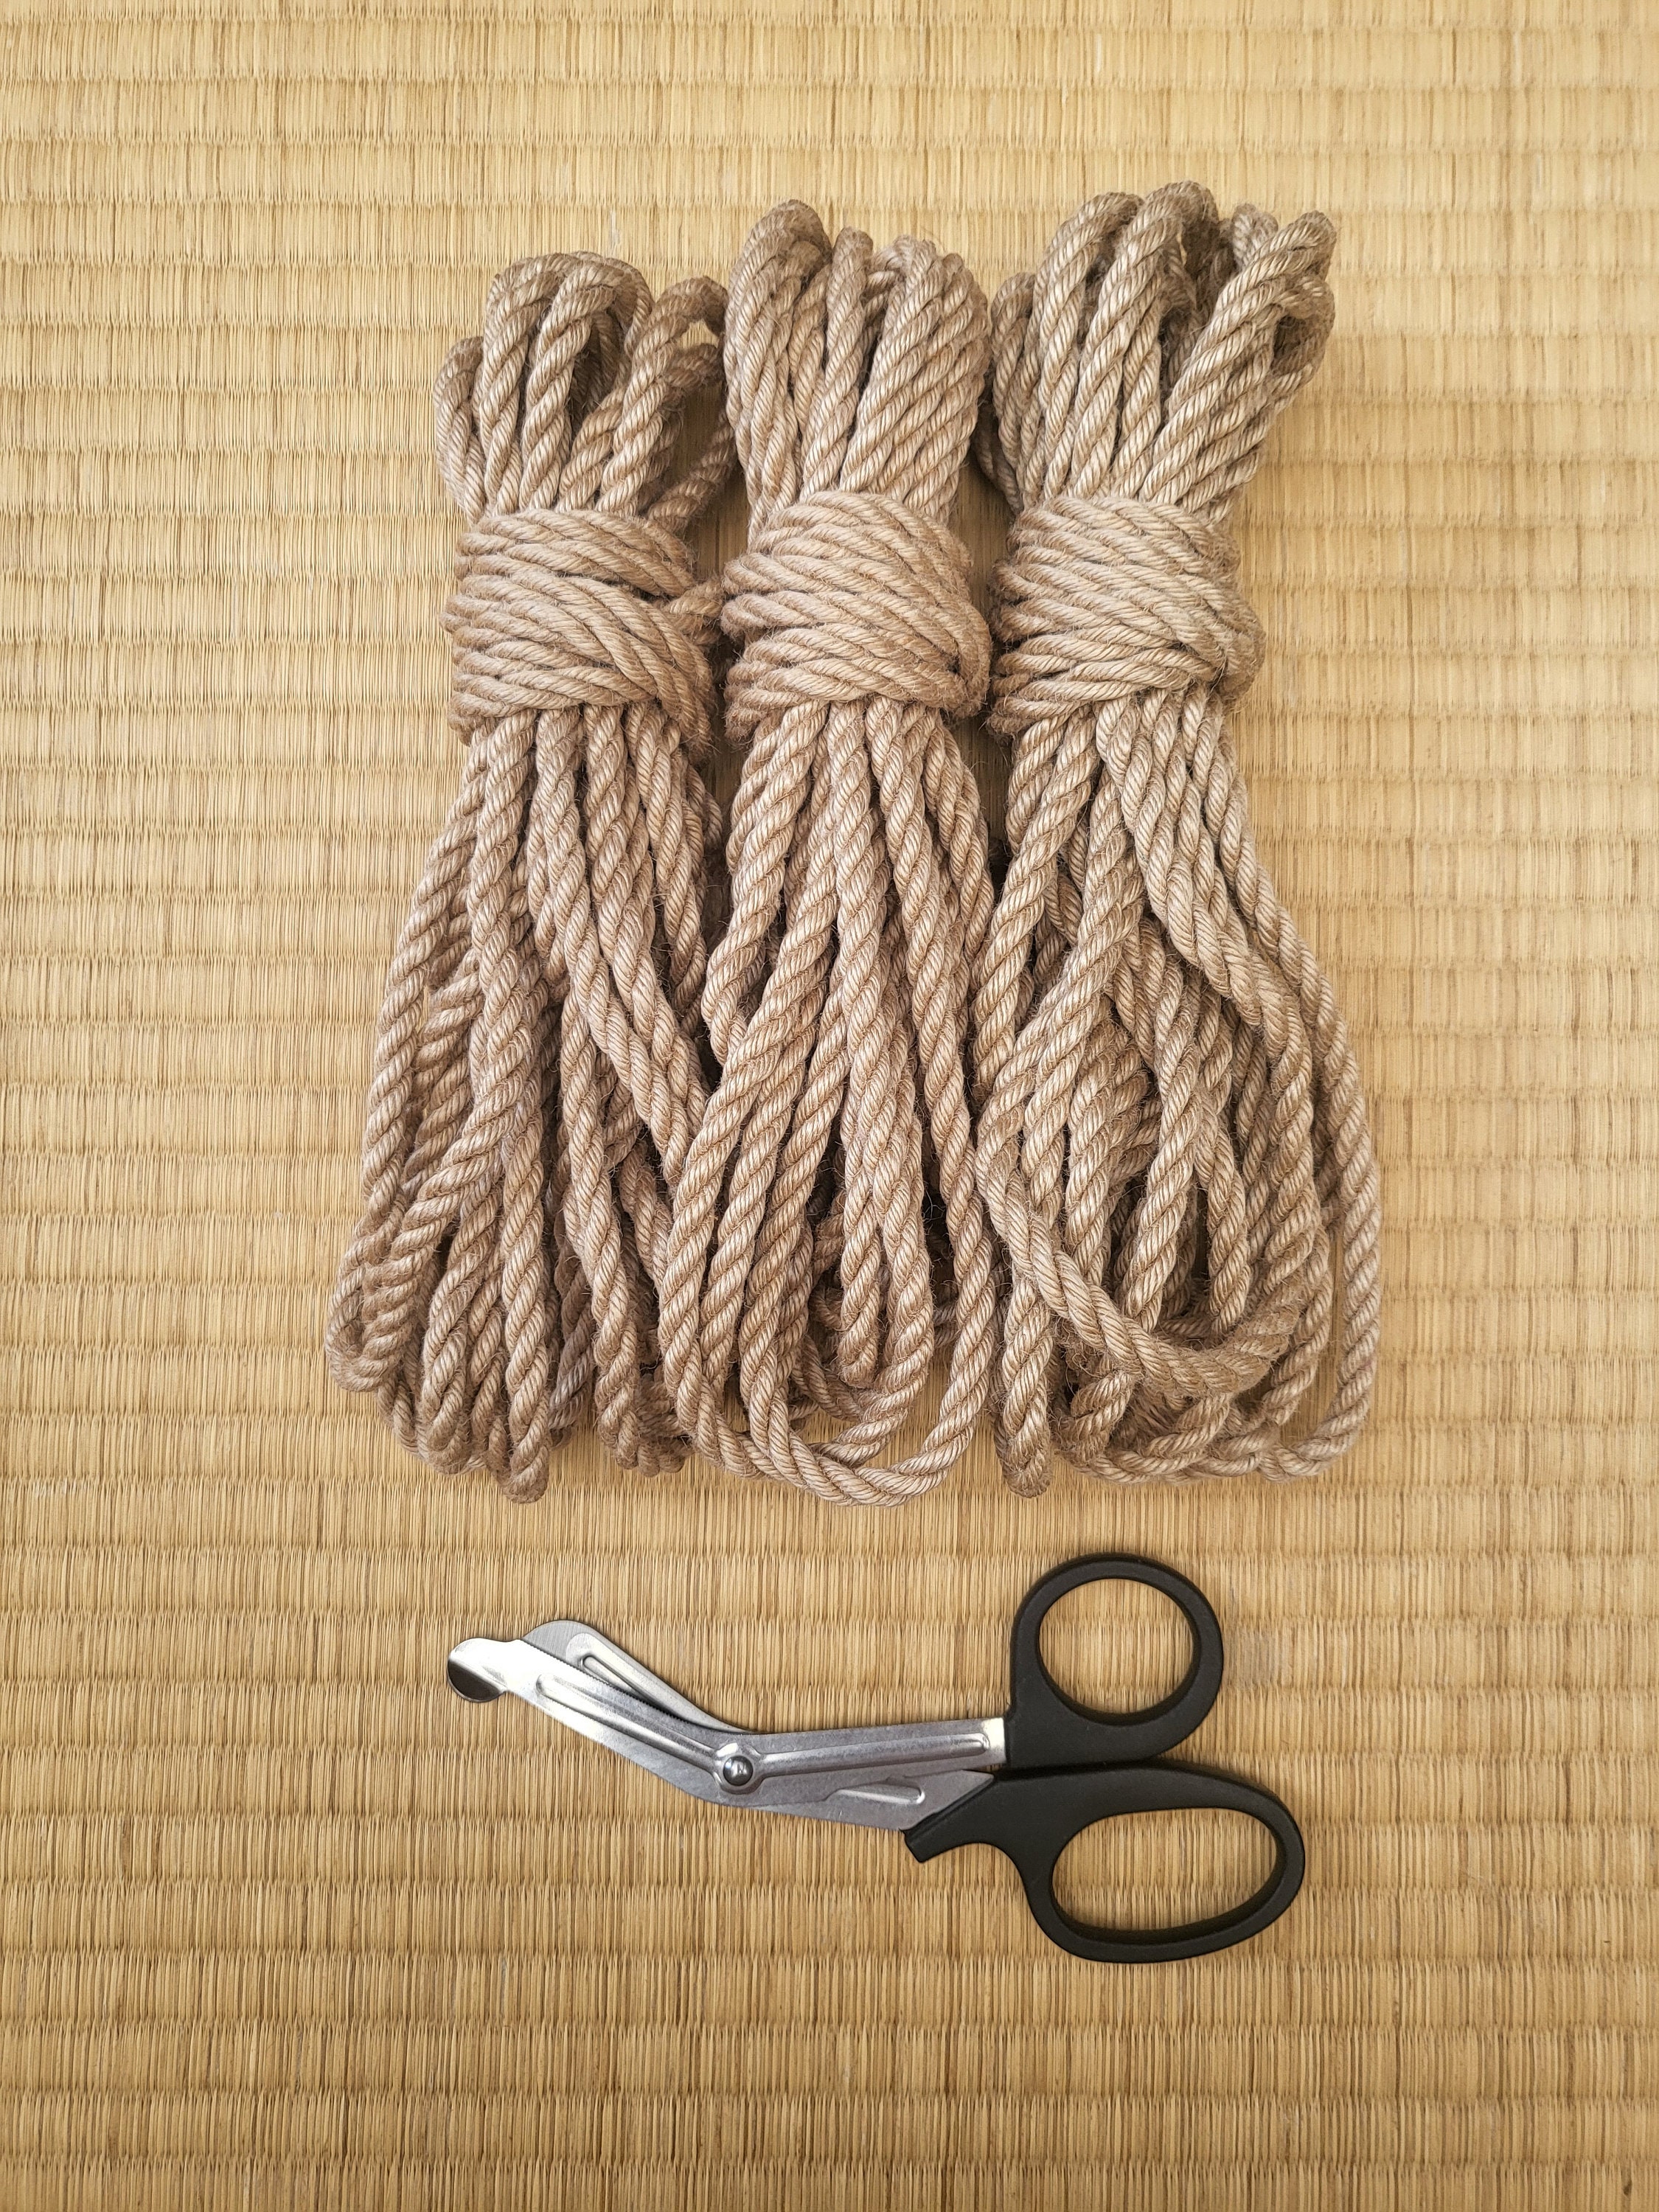 Shibari Rope. 'natural Fully Treated' Made From Single Ply, Tossa Jute.  Vegan-friendly Handmade for Bondage. Various Lengths Available. 